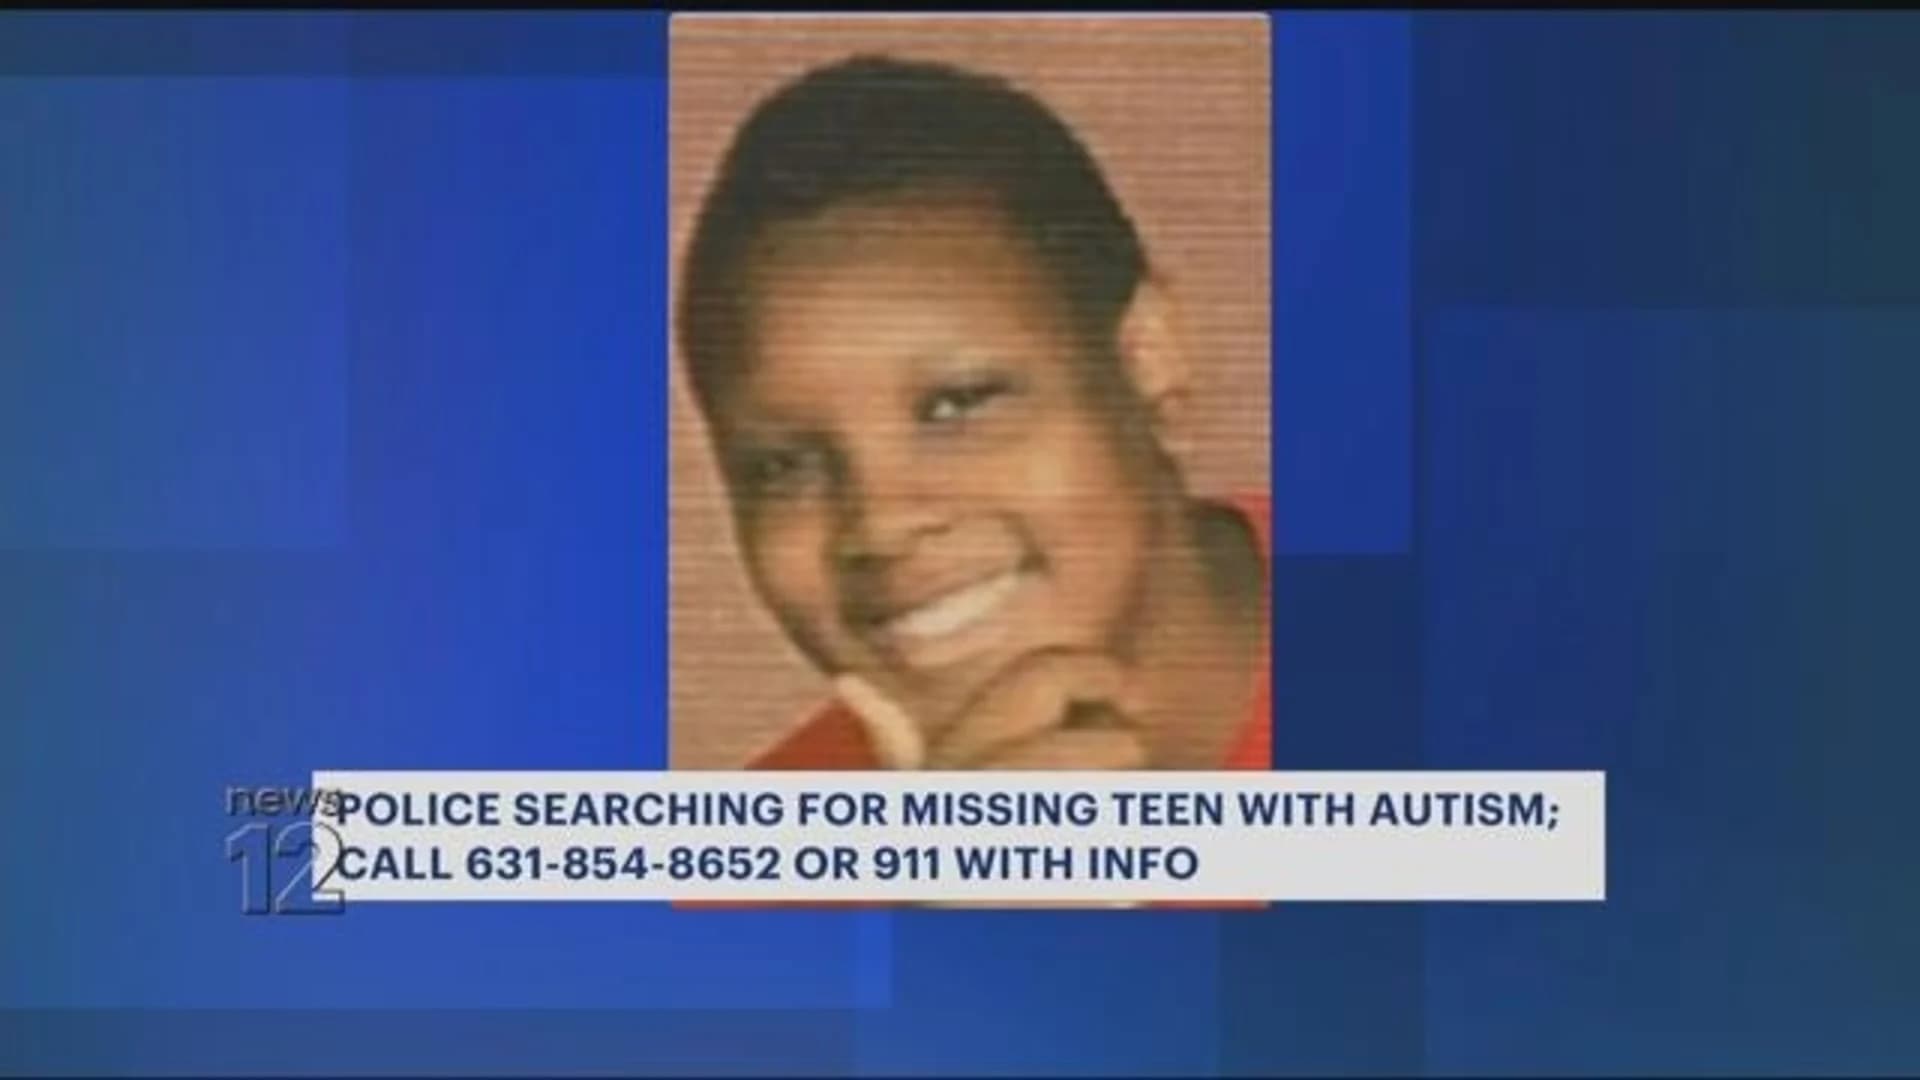 Police: Missing teen with autism has been found